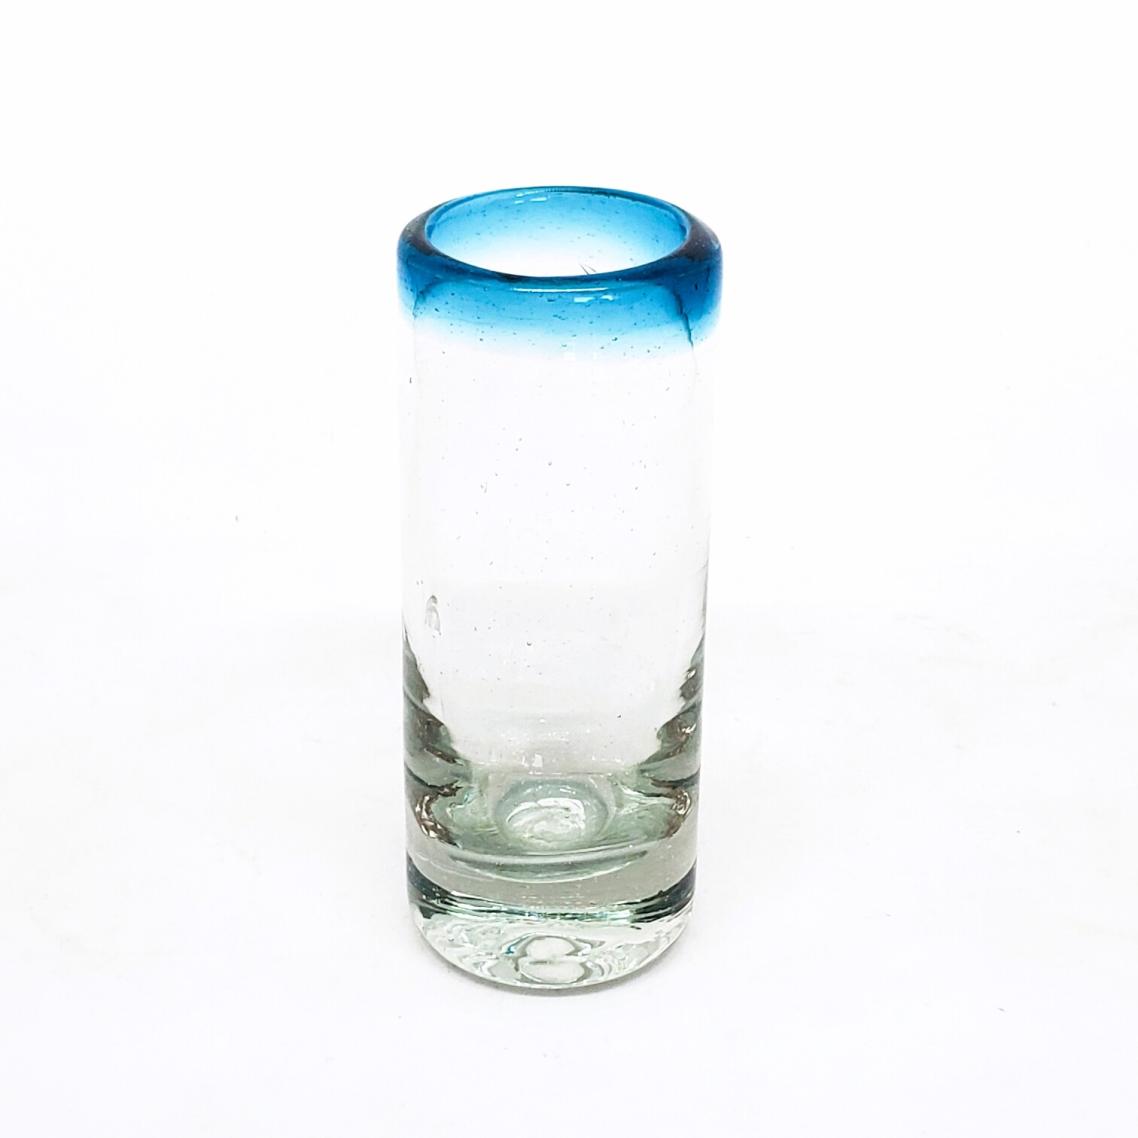 Sale Items / Aqua Blue Rim 2 oz Tequila Shot Glasses  / Reminiscent of the turquoise Caribbean waters of Tulum, our Aqua Blue Rim shot glasses are perfect for enjoying mezcal or any other liquor.